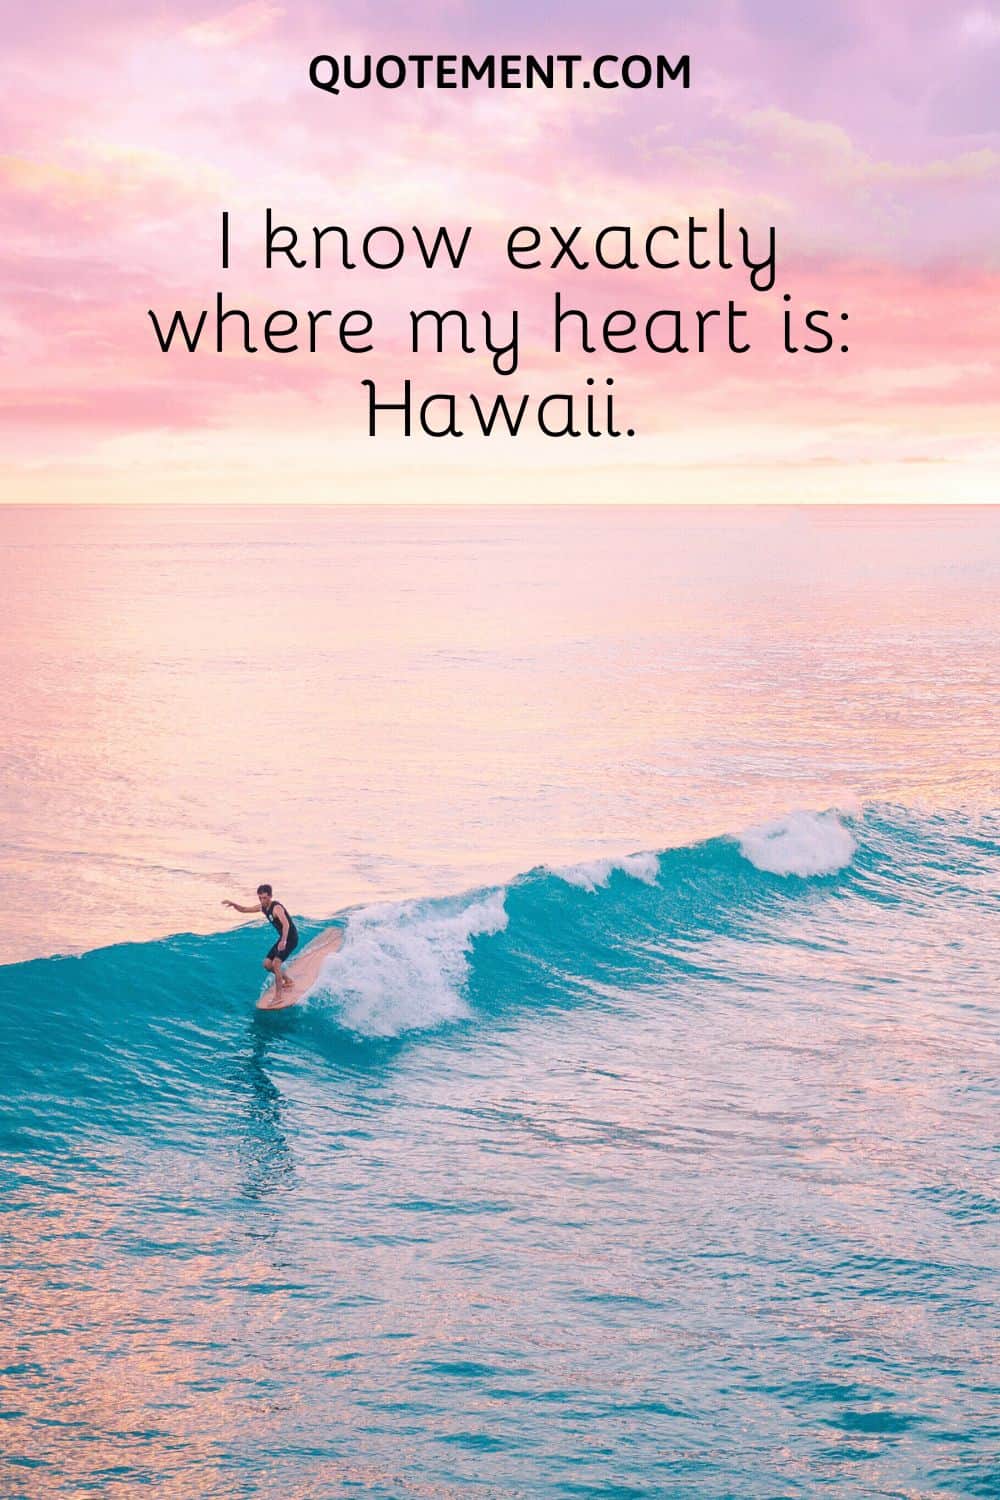 I know exactly where my heart is Hawaii.